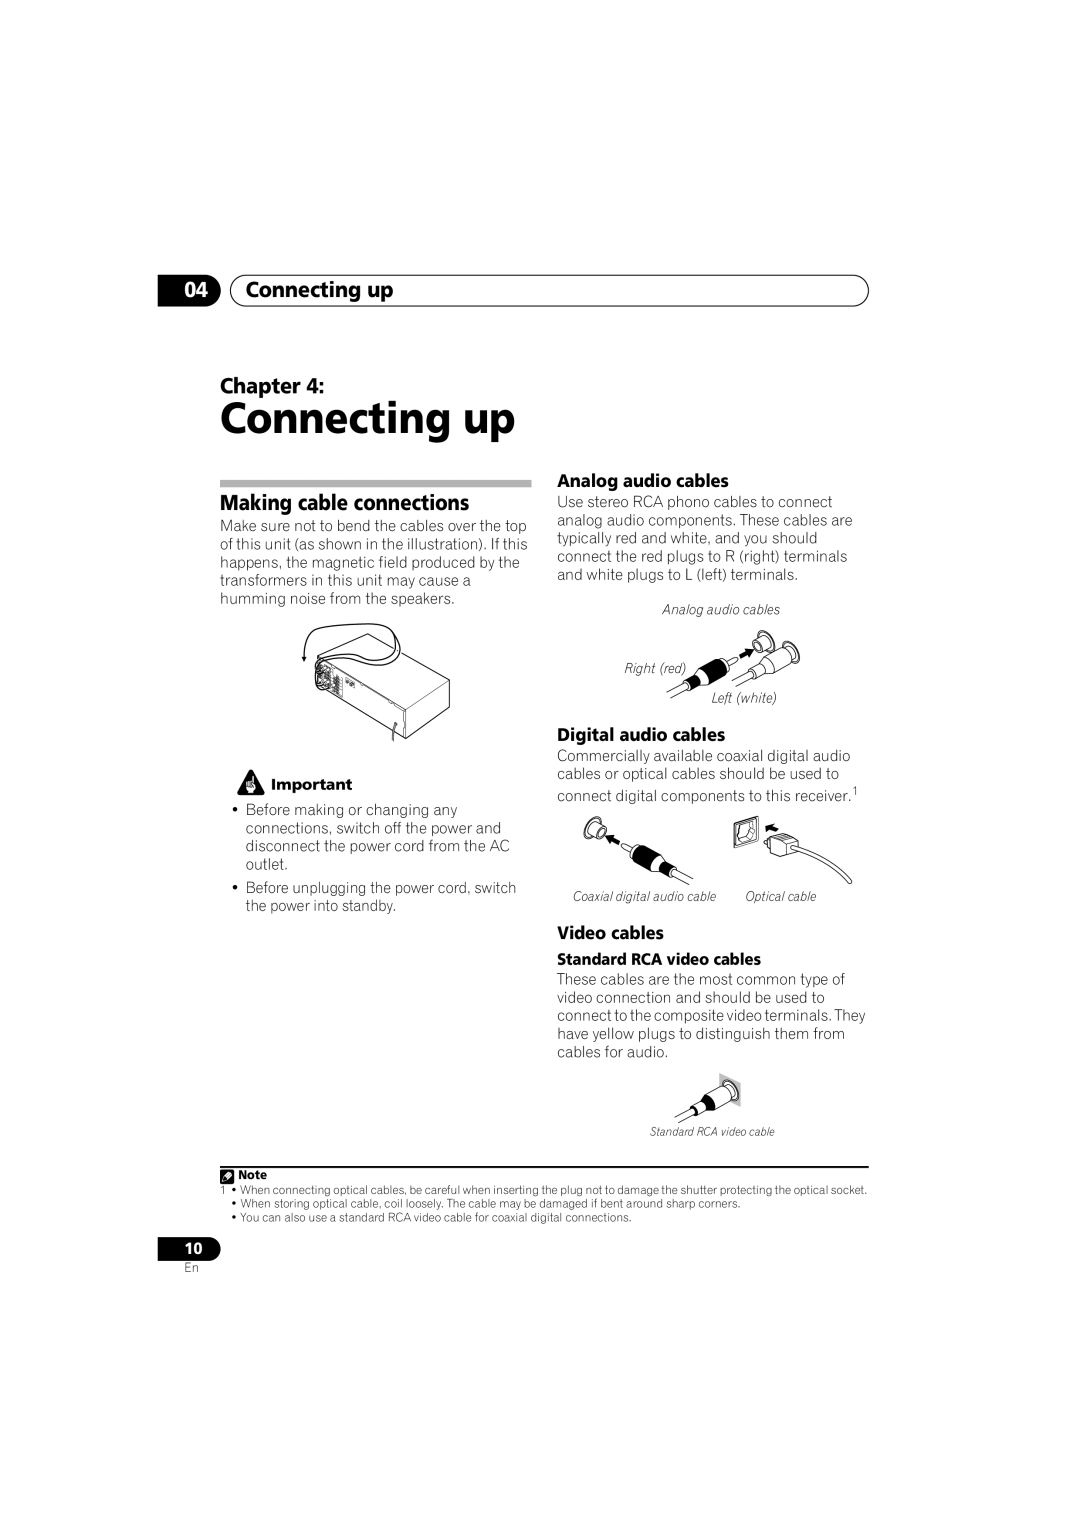 Pioneer 516-S/-K, VSX-416-S/-K manual Connecting up Chapter, Making cable connections, Standard RCA video cables 